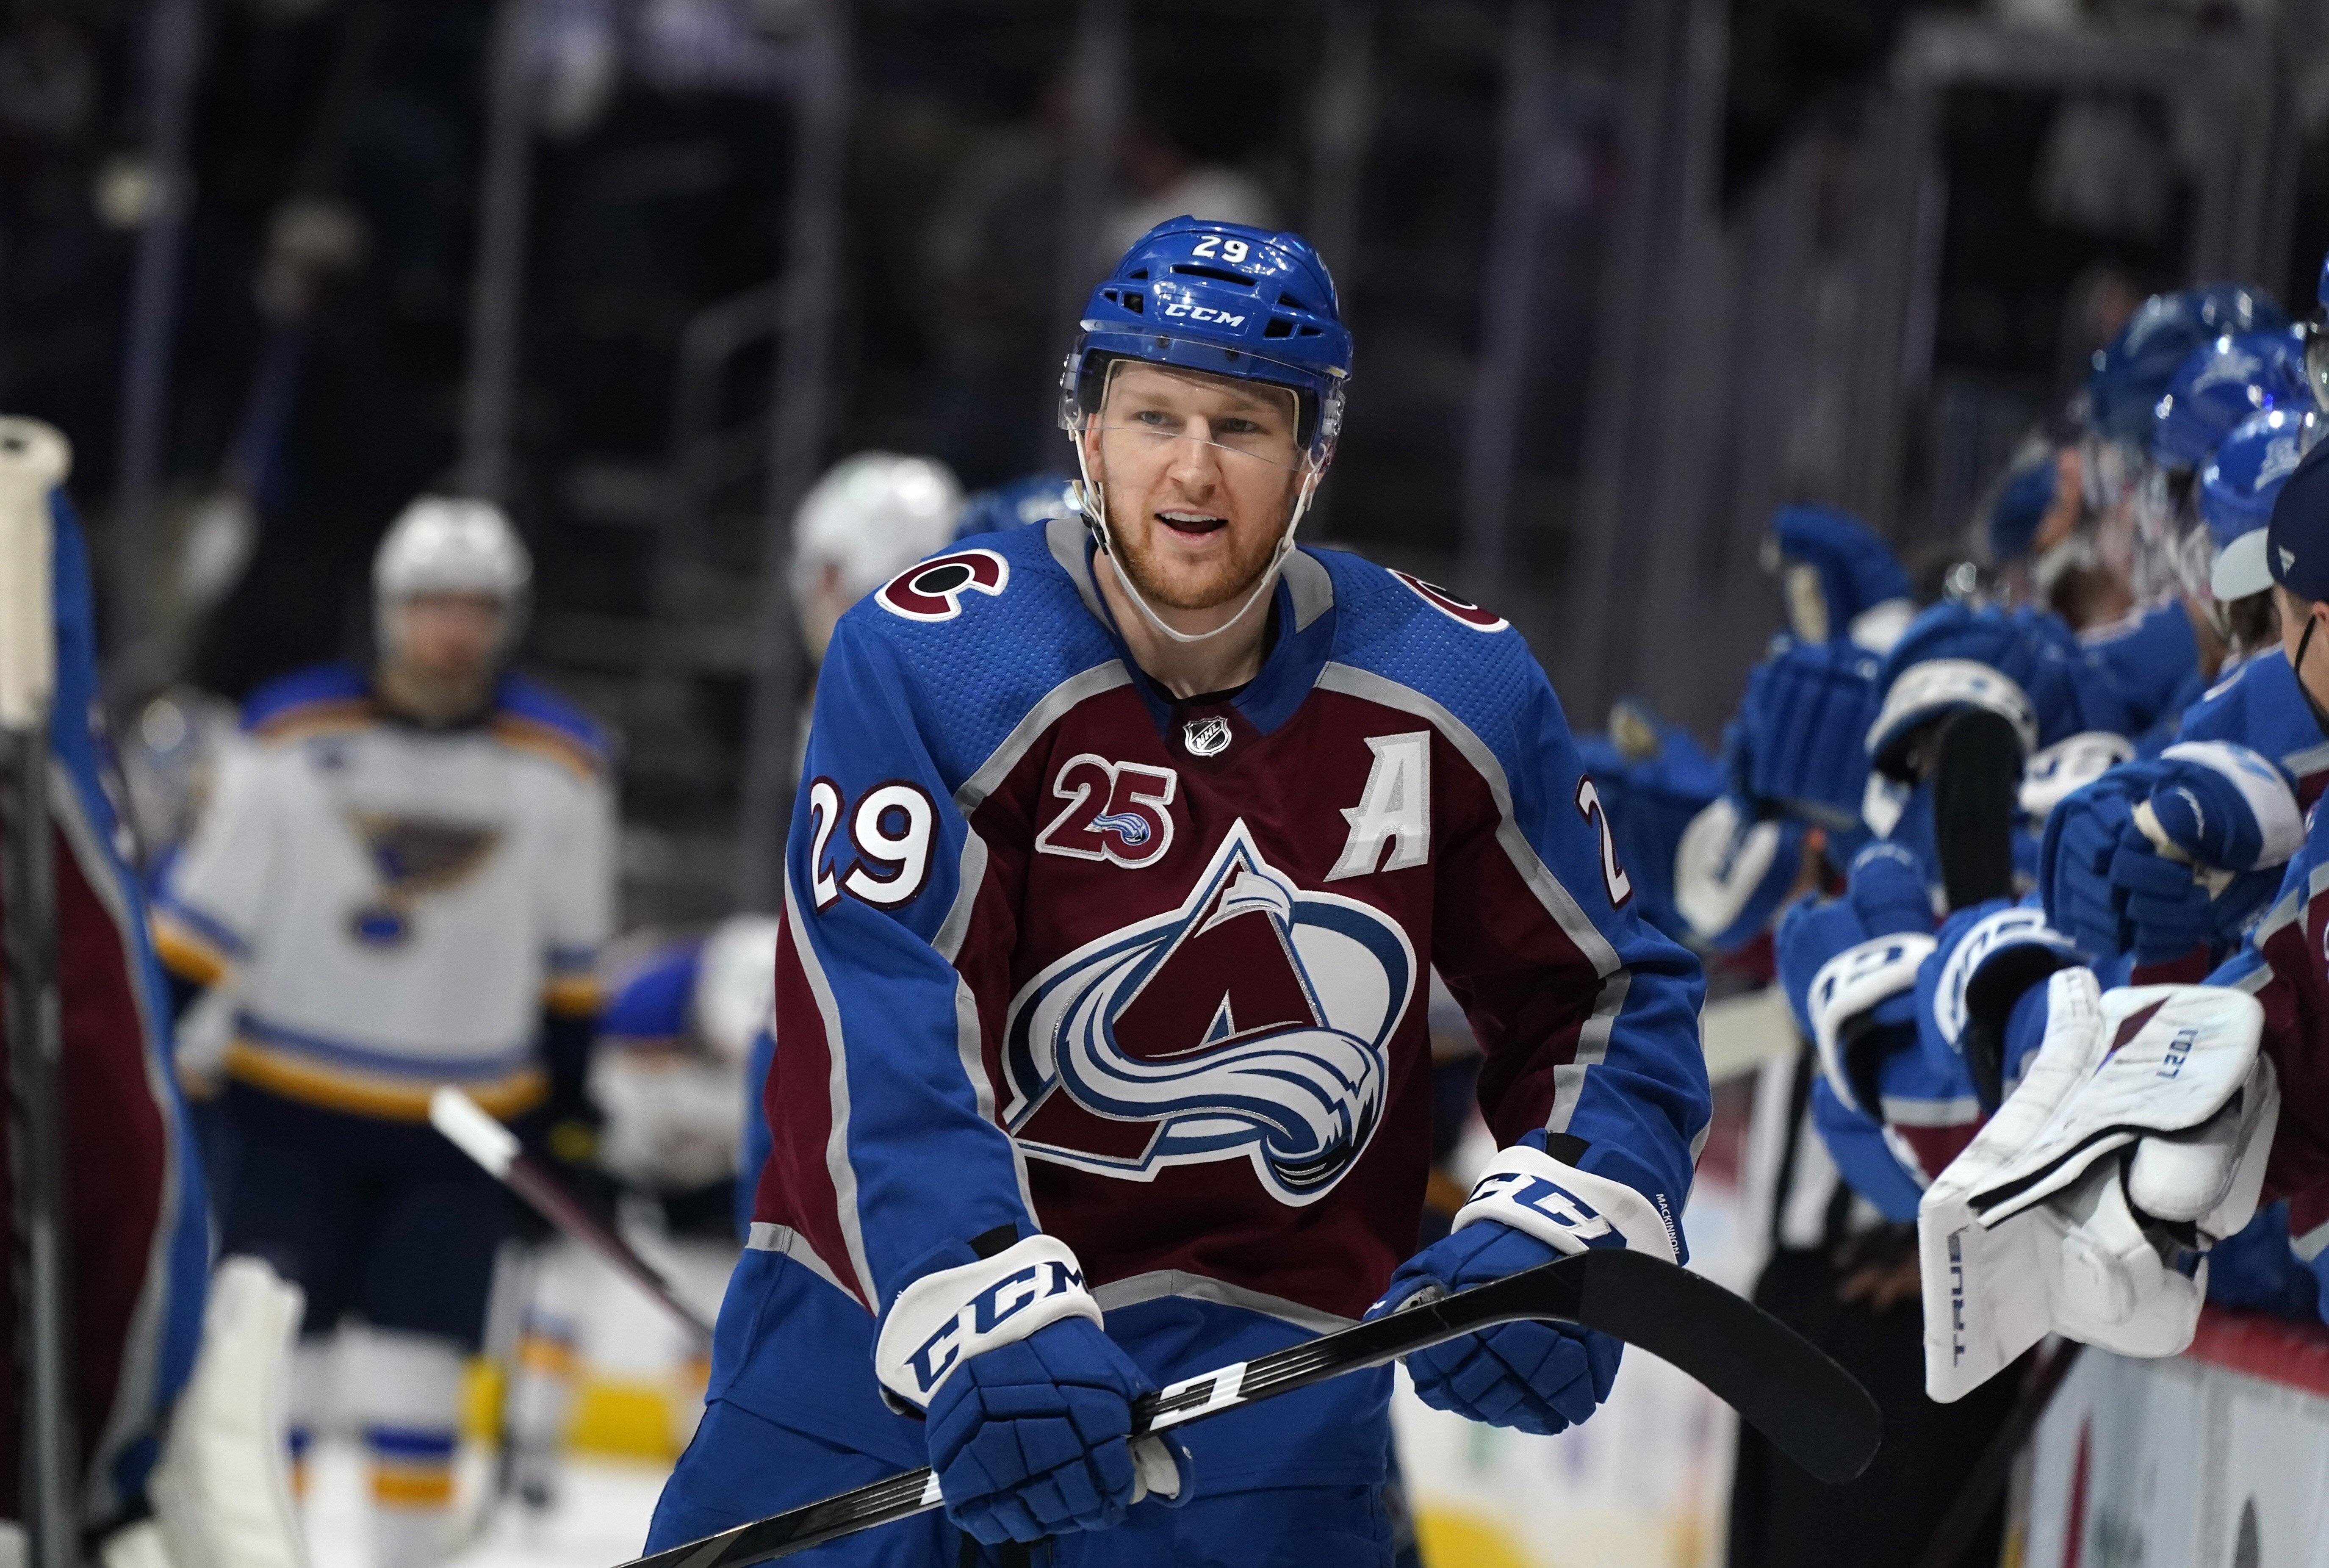 Nathan MacKinnon could be Canada’s most overlooked player and may be the game-breaker come February at the 2022 Winter Olympics in Beijing. Photo: AP